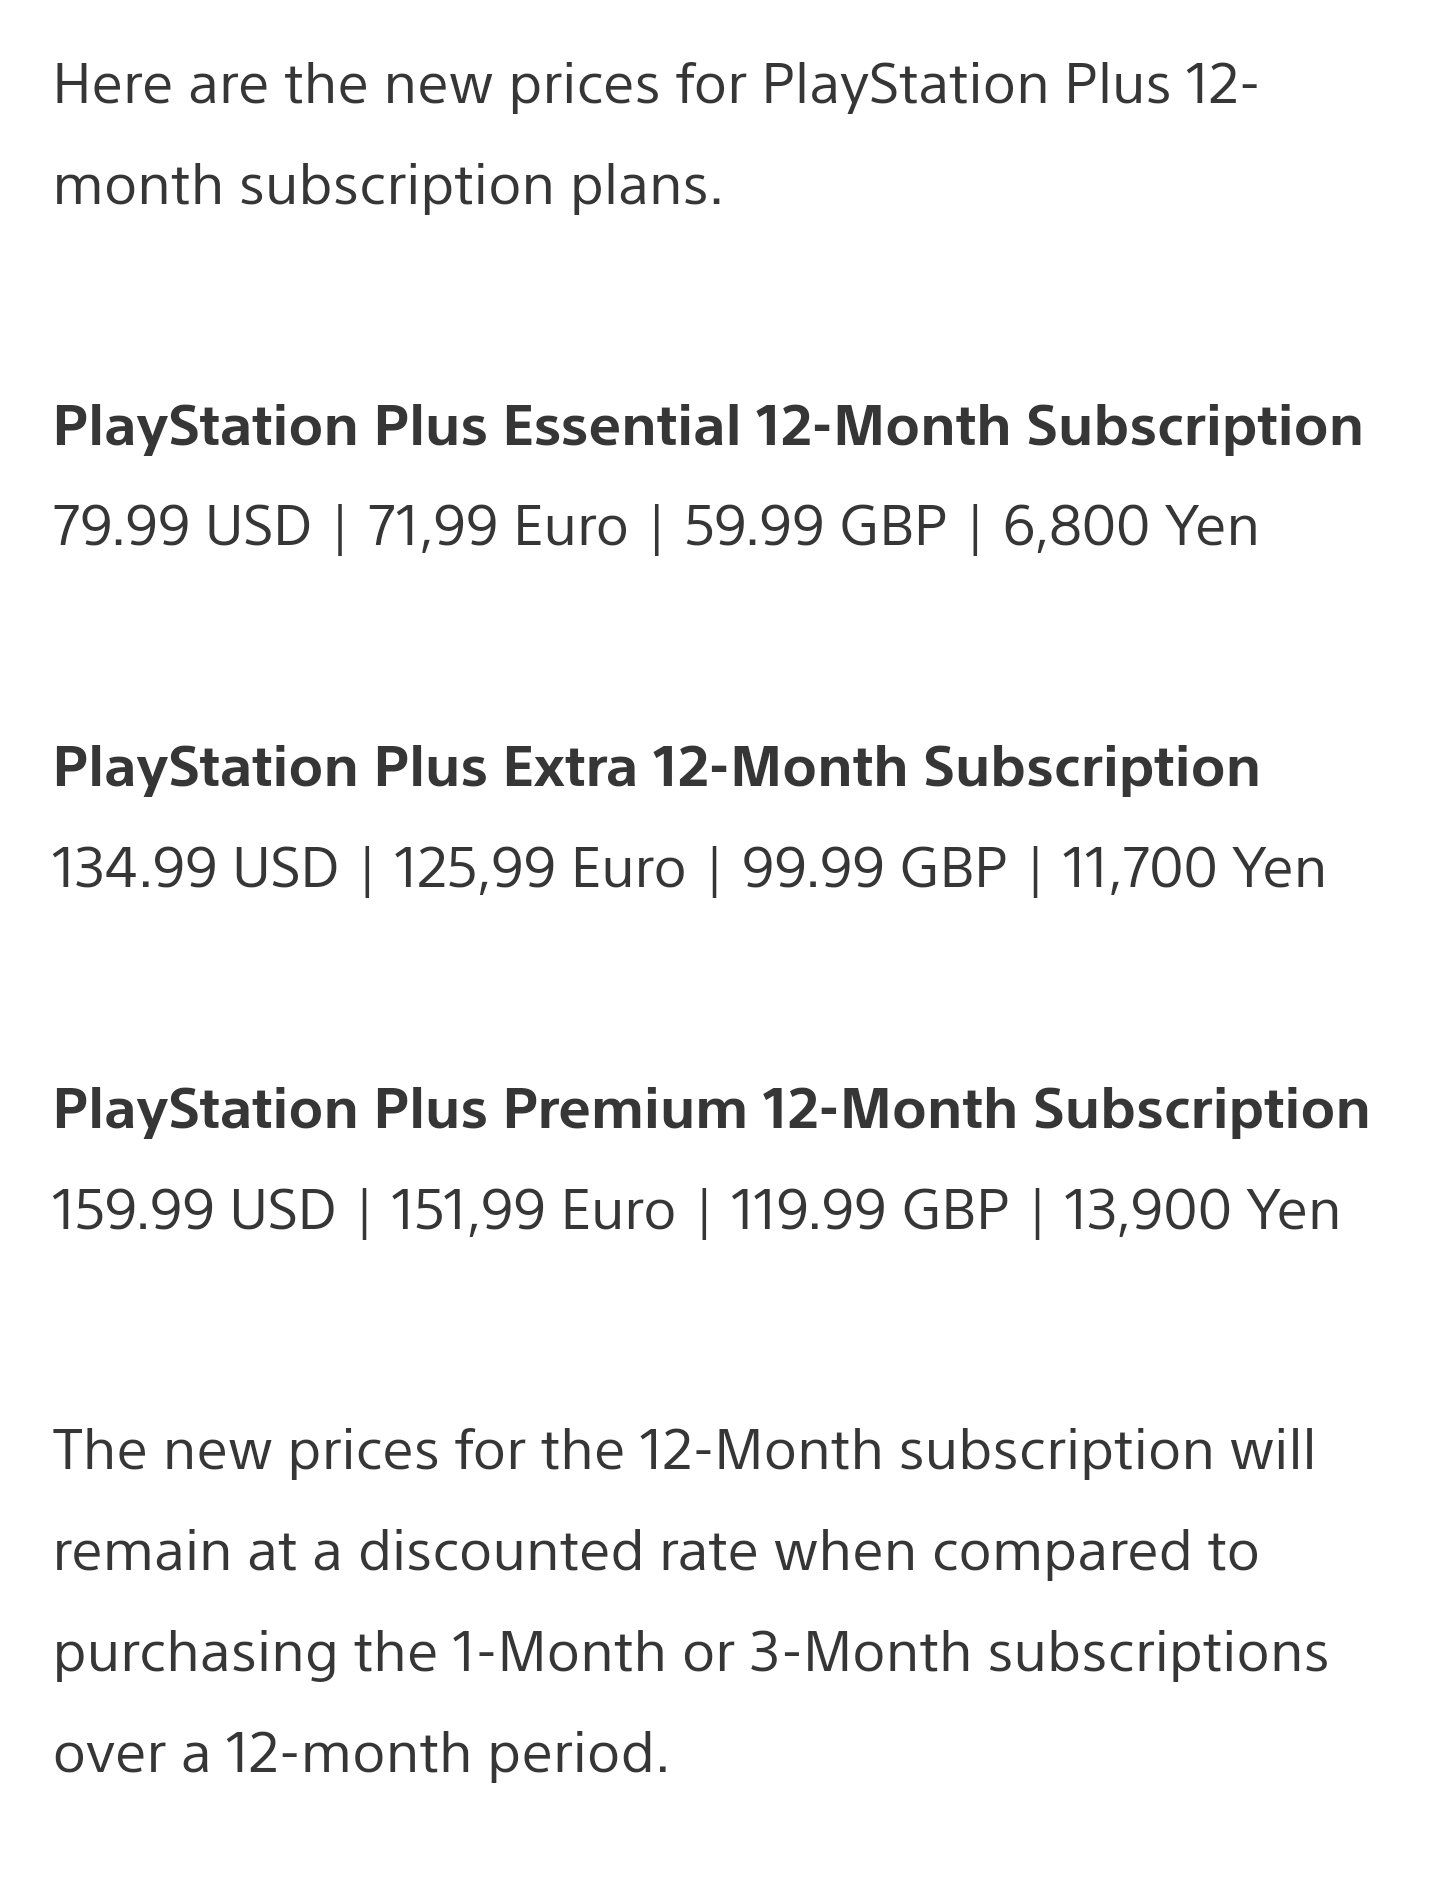 Yogensha on X: PS Plus prices are going up once again, and right after  Microsoft removed Games for Gold from their Subscription while keeping the  prices the same. But, console gamers will